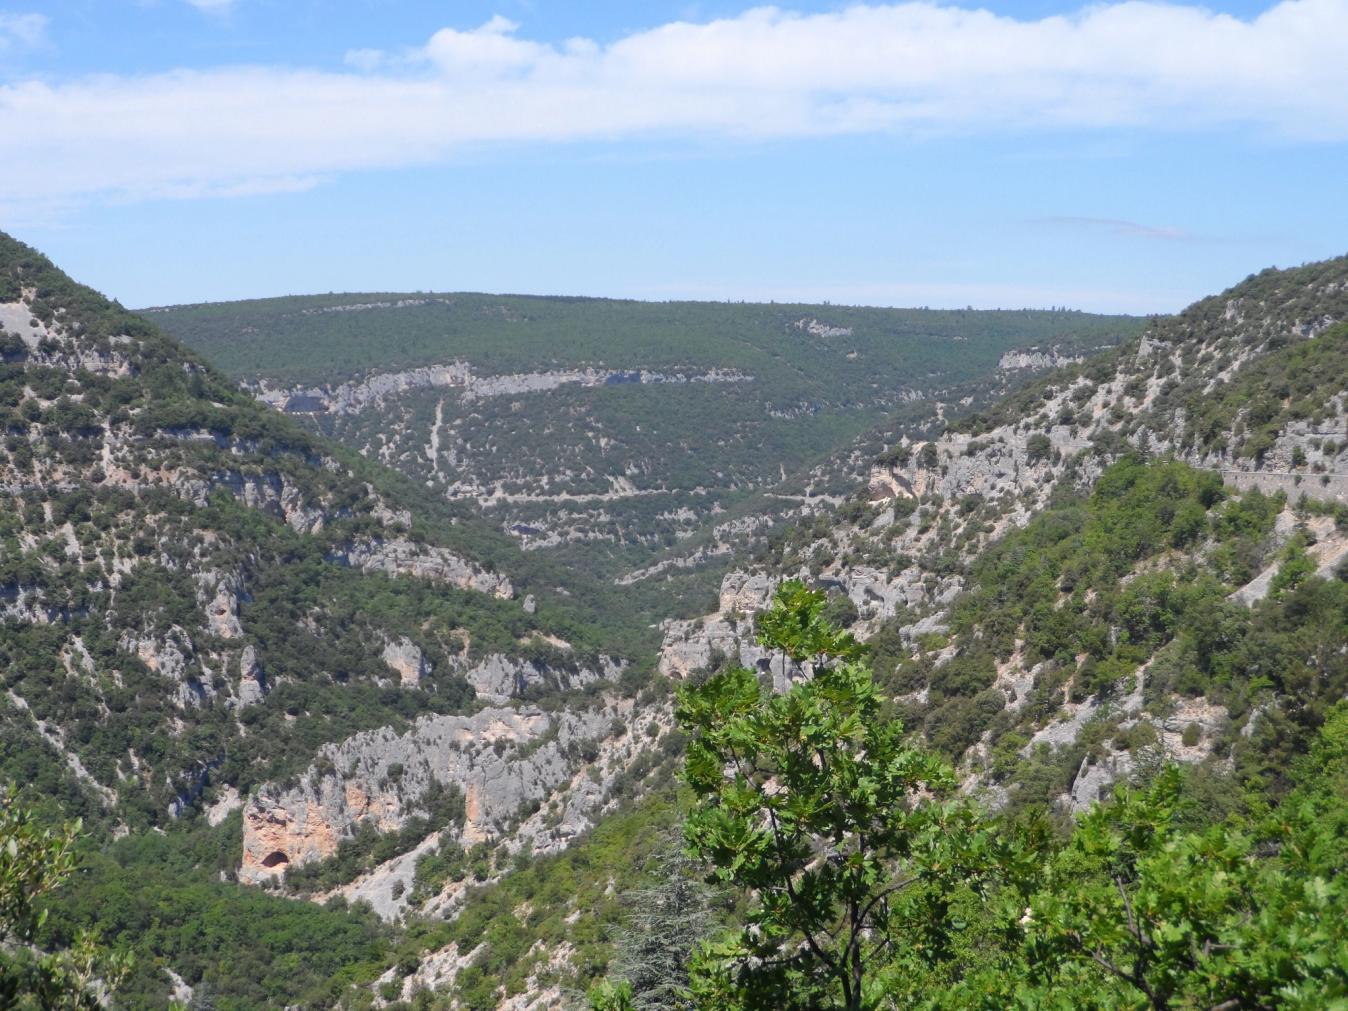 The incredible scenery along the Gorges de la Nesque is the main reason why it is so popular with cyclists